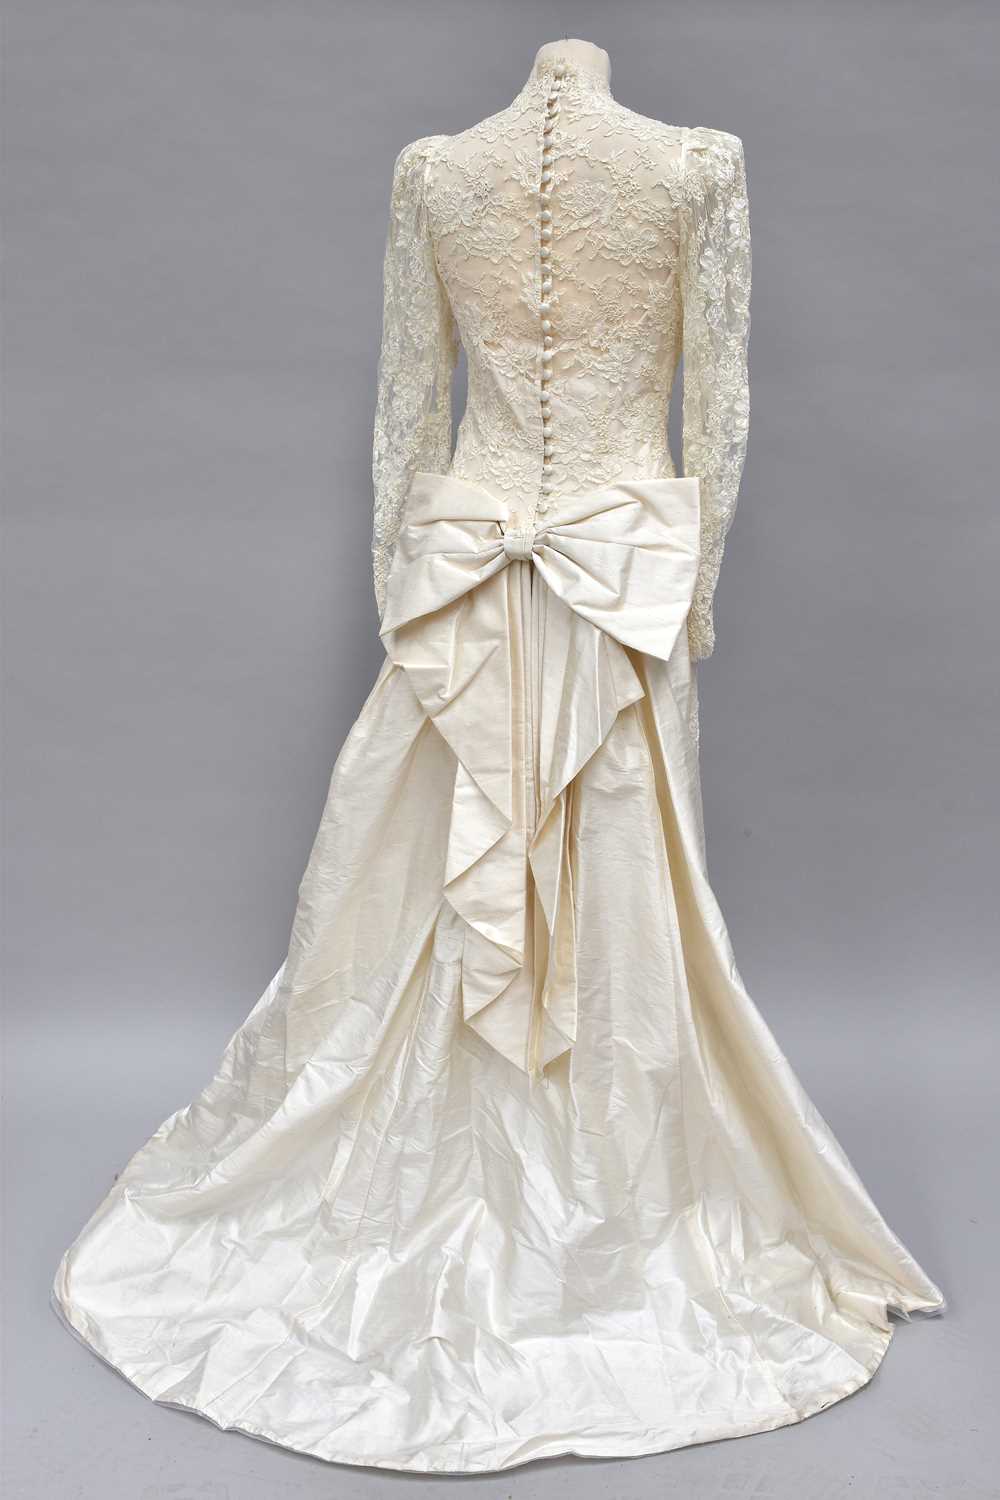 Circa 1990s Wizard of Gos, High Street Kensington London Ivory Lace Mounted Wedding Dress, with long - Image 2 of 2